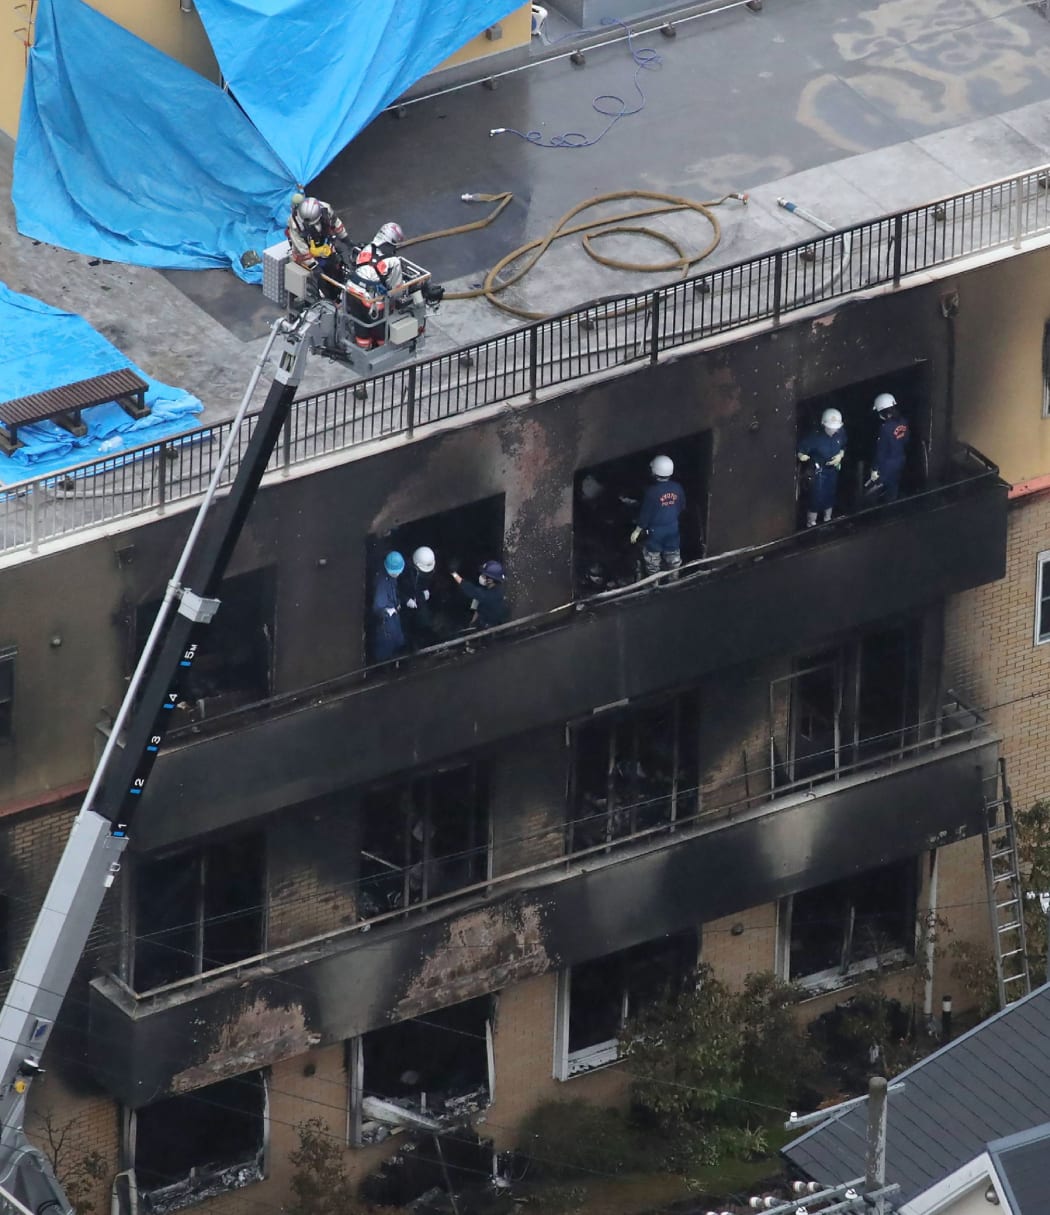 This aerial view shows the rescue and recover scene after a fire at an animation company building killed some two dozen people in Kyoto on July 18, 2019.